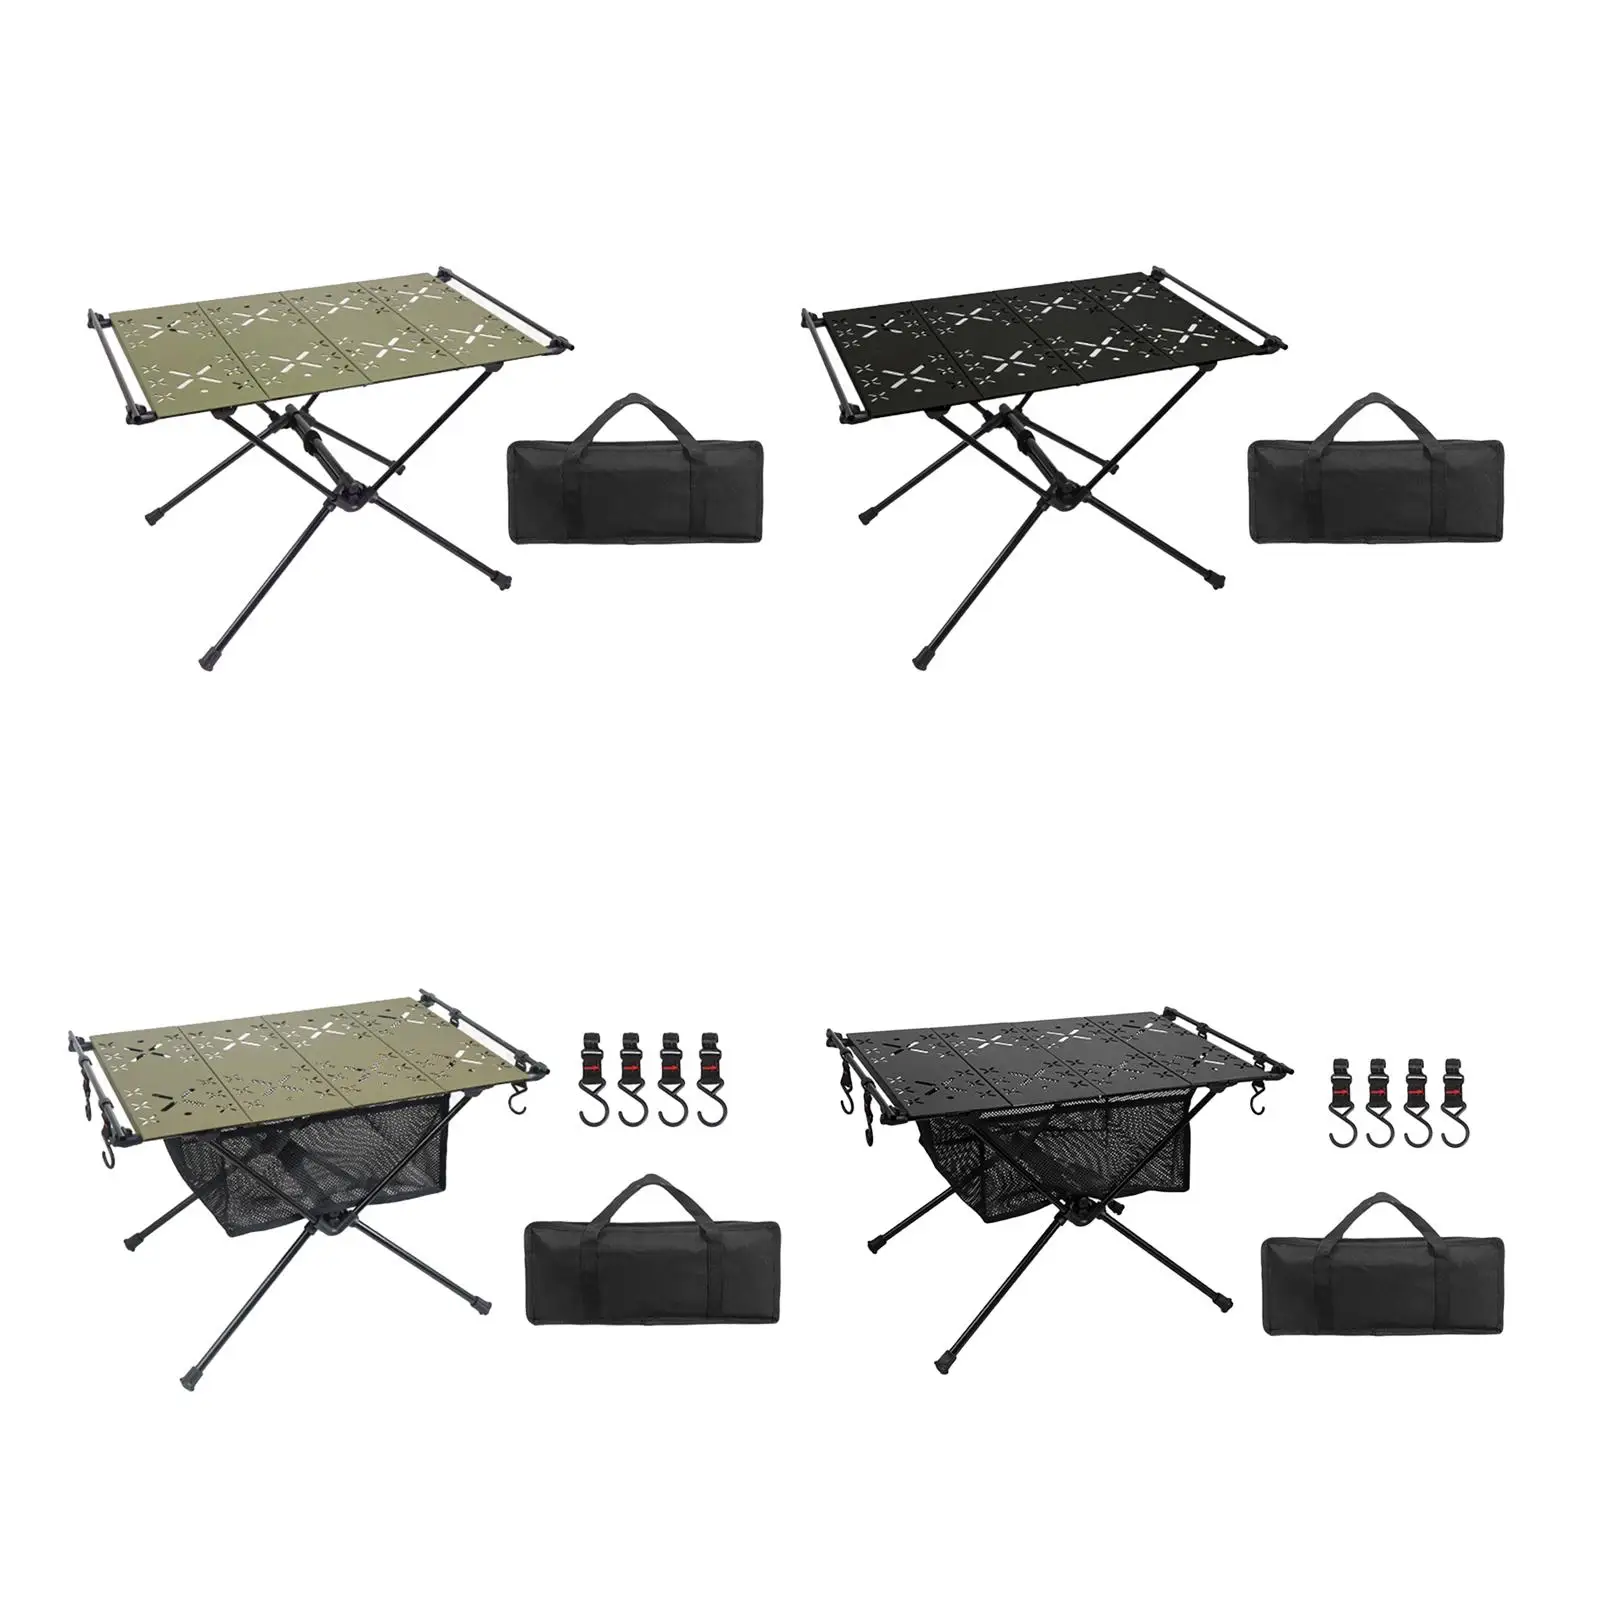 Foldable Camping Table Aluminum Alloy Outdoor Table Beach Table Ultralight Desk for Garden Backpacking Backyard Yard BBQ